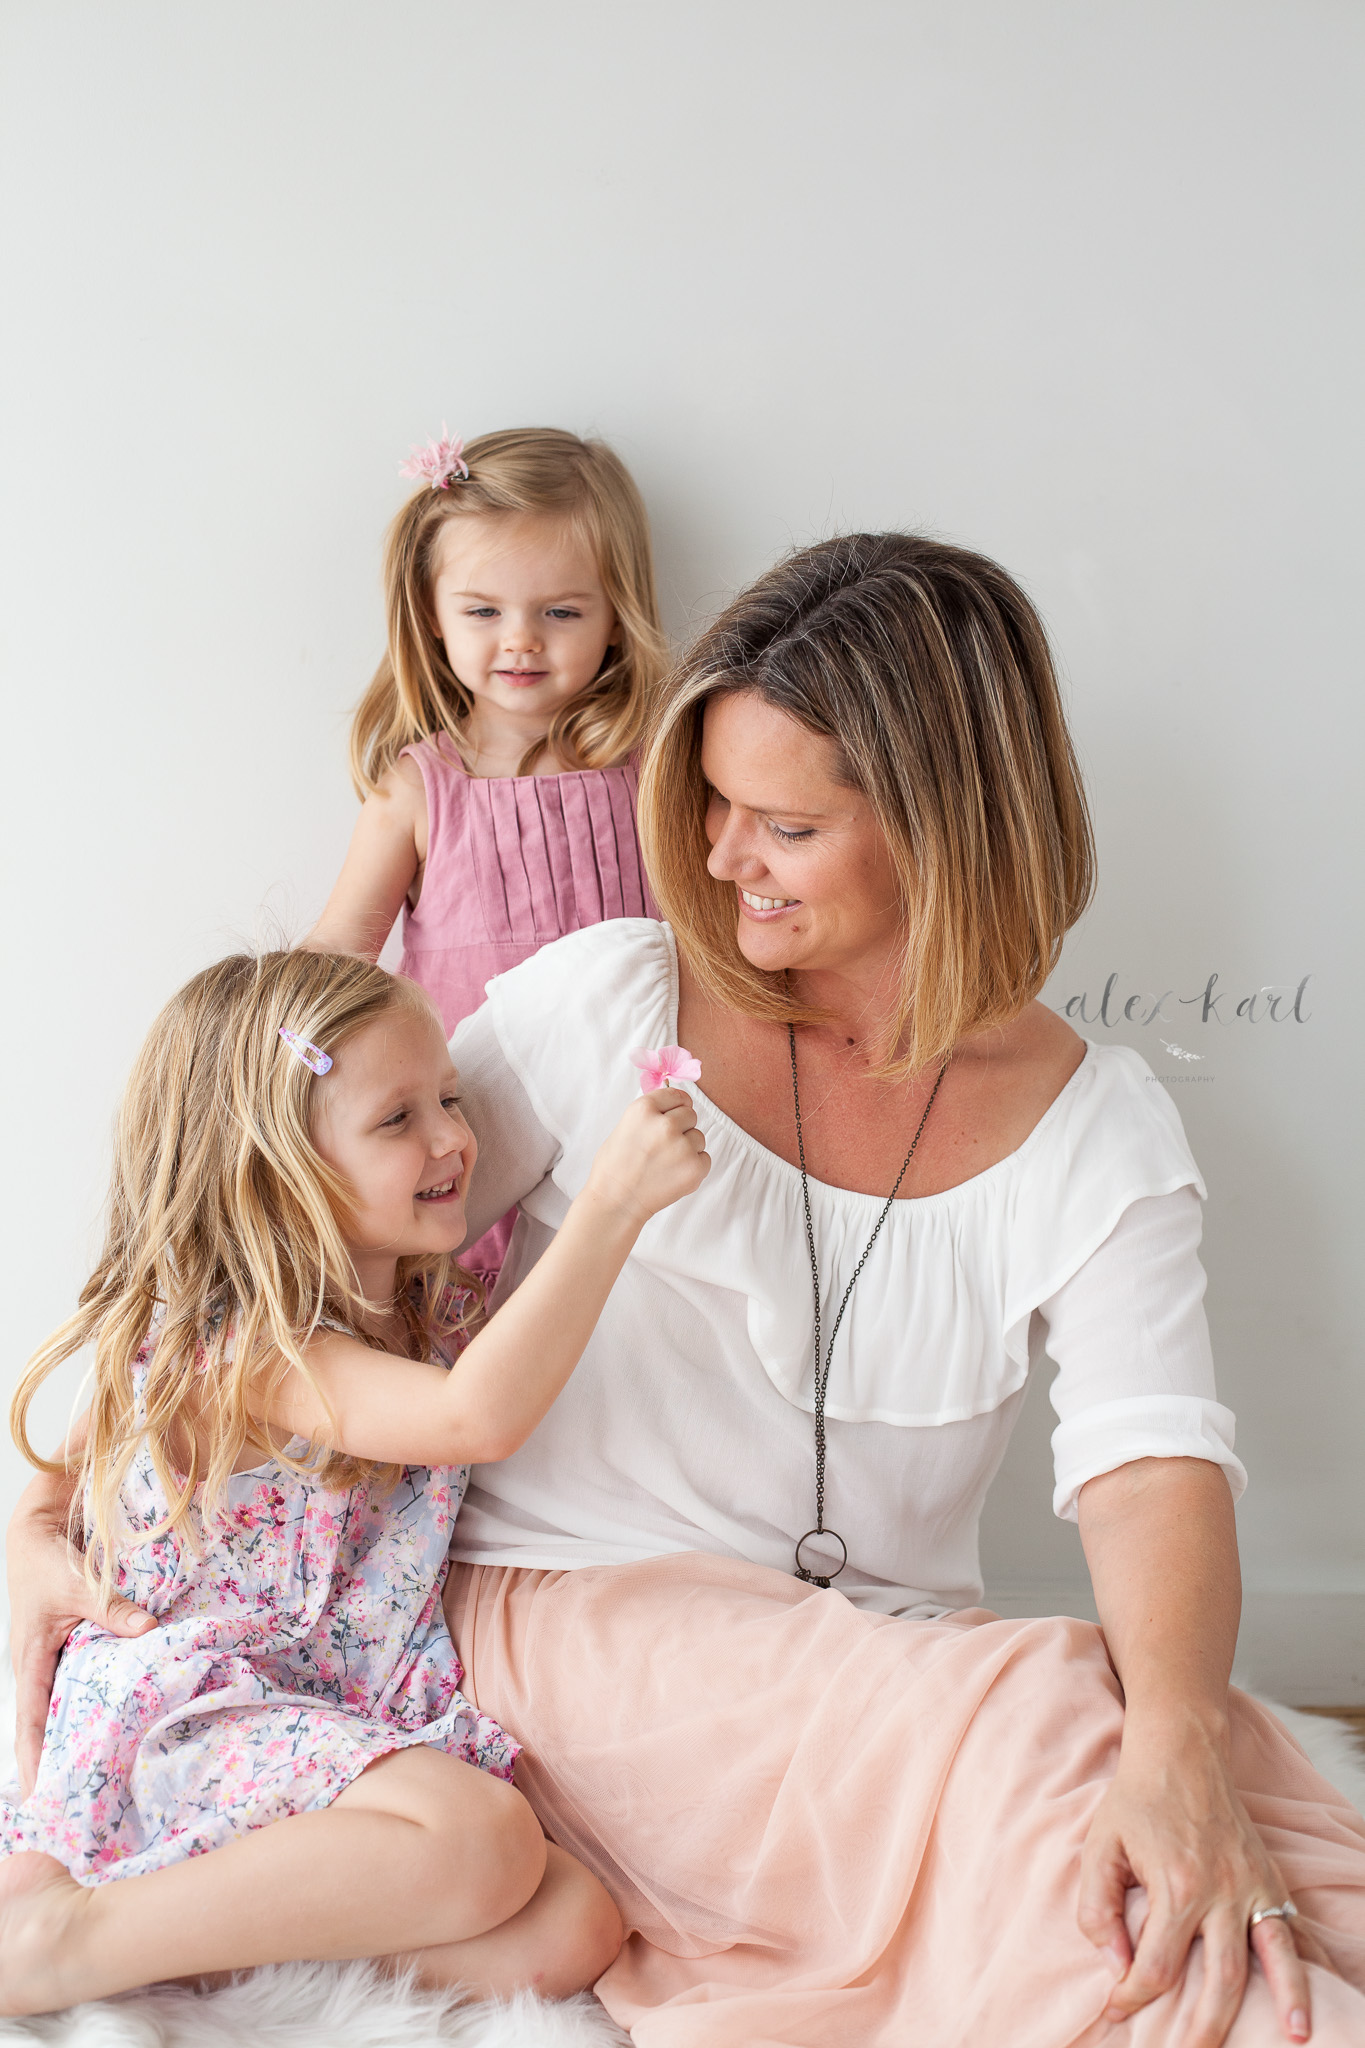 A girl gives her mom a flower  | Alex Karl Photography | Palm Beach Family Photographer